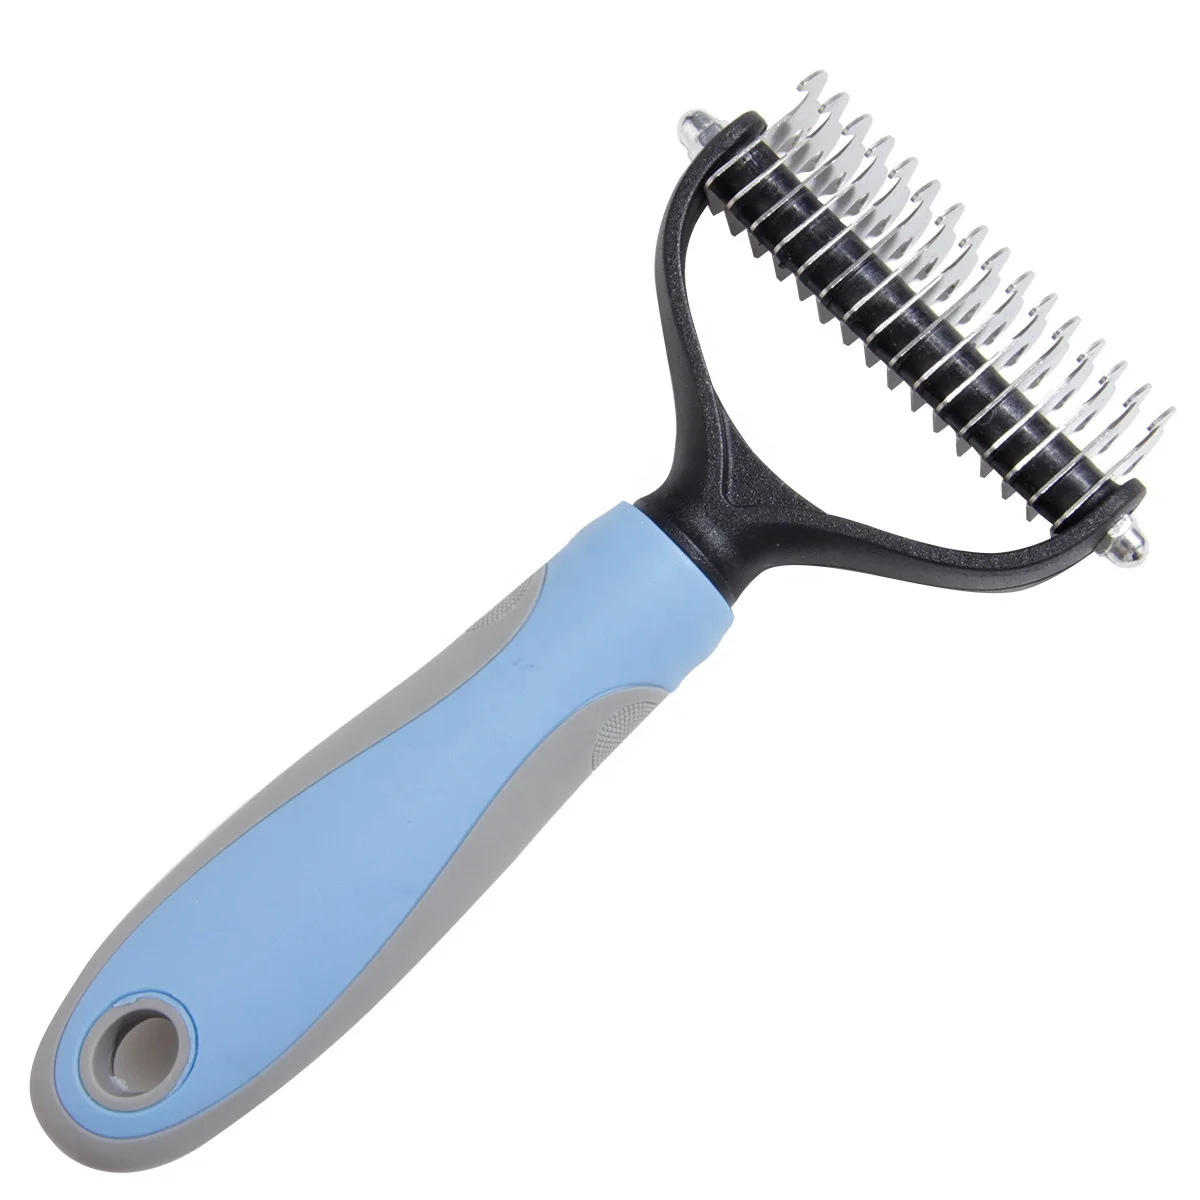 

Beauty And Daily Cleaning Dog Cat Pet Hair Removal Comb Double Sided Blades Fur Dematting Trimmer Deshedding Brush Grooming Tool, Blue,pink